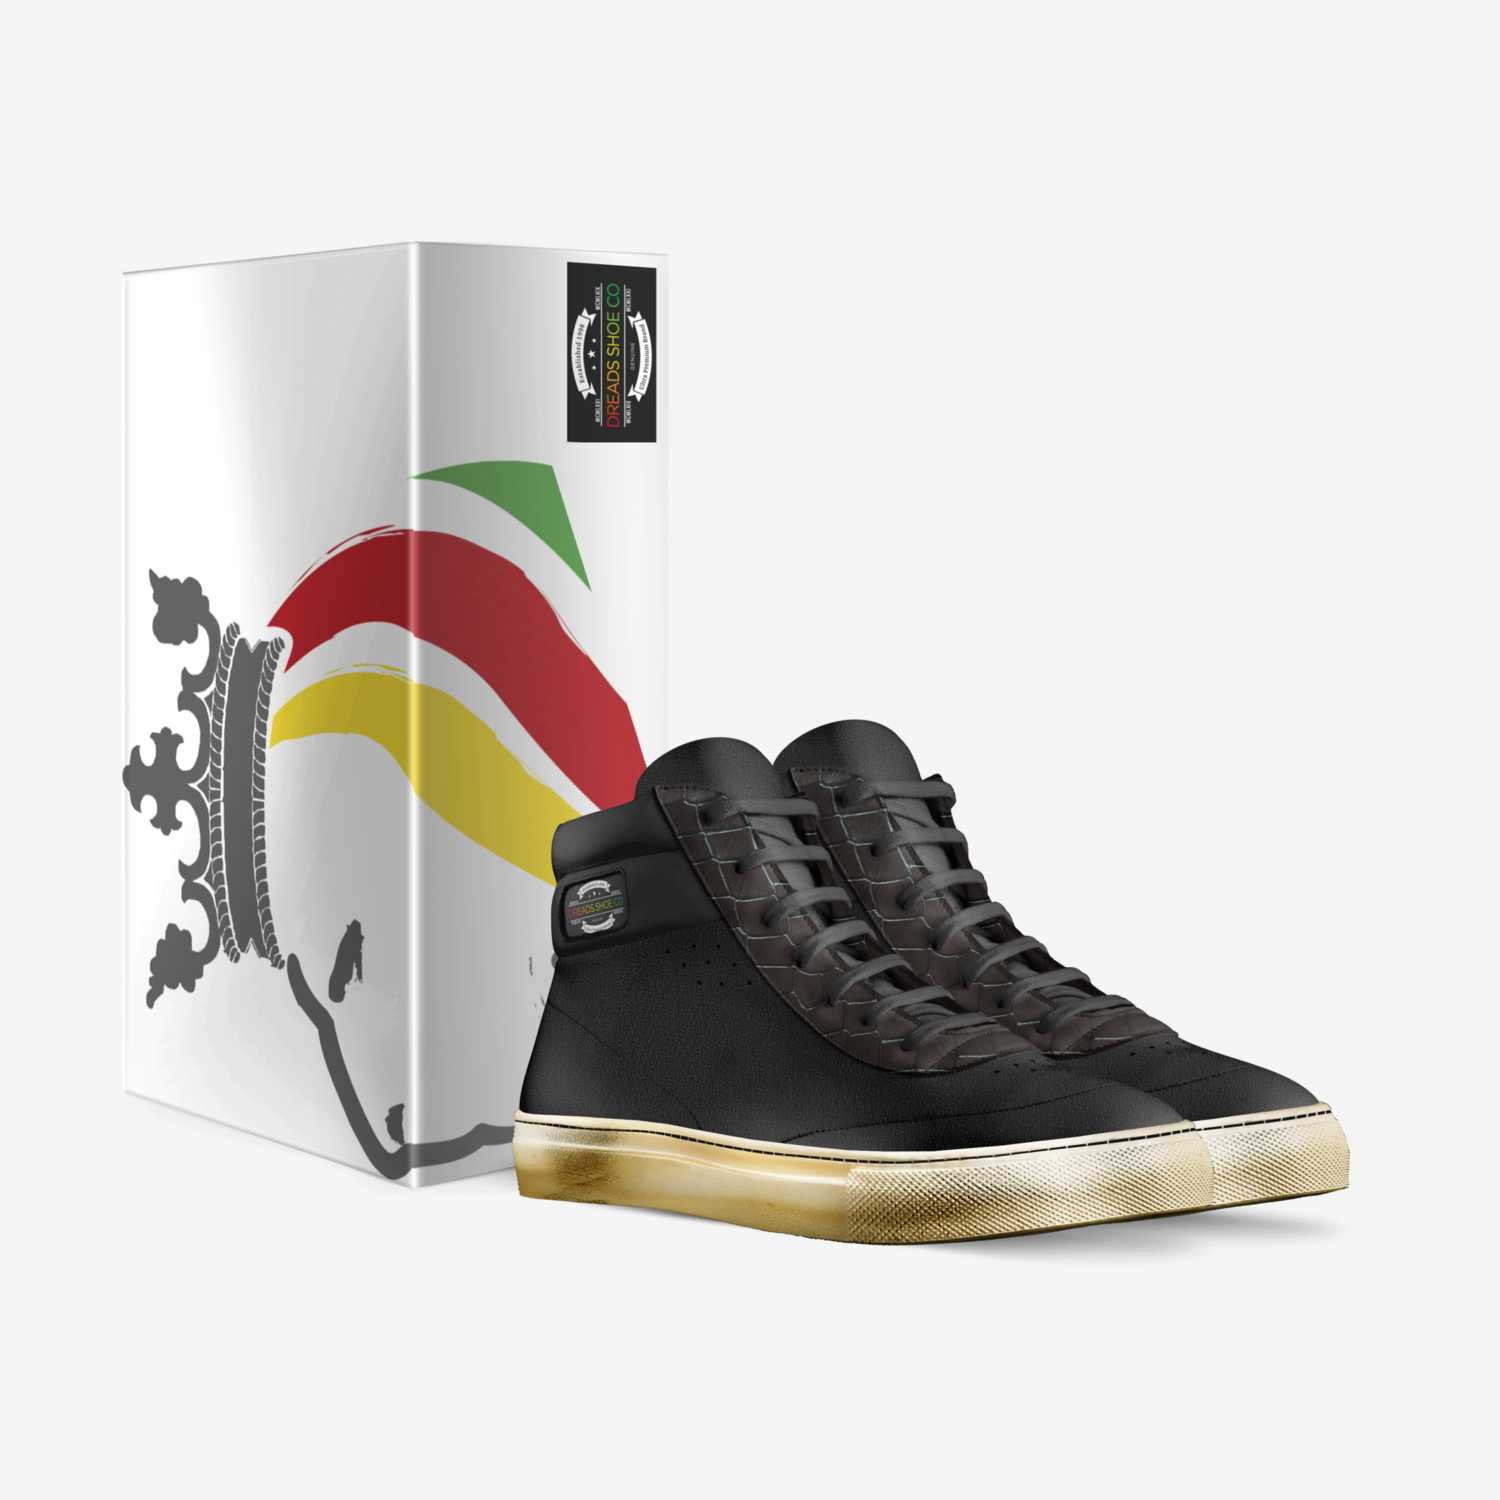 DREADS SHOE CO custom made in Italy shoes by Jeremy James | Box view